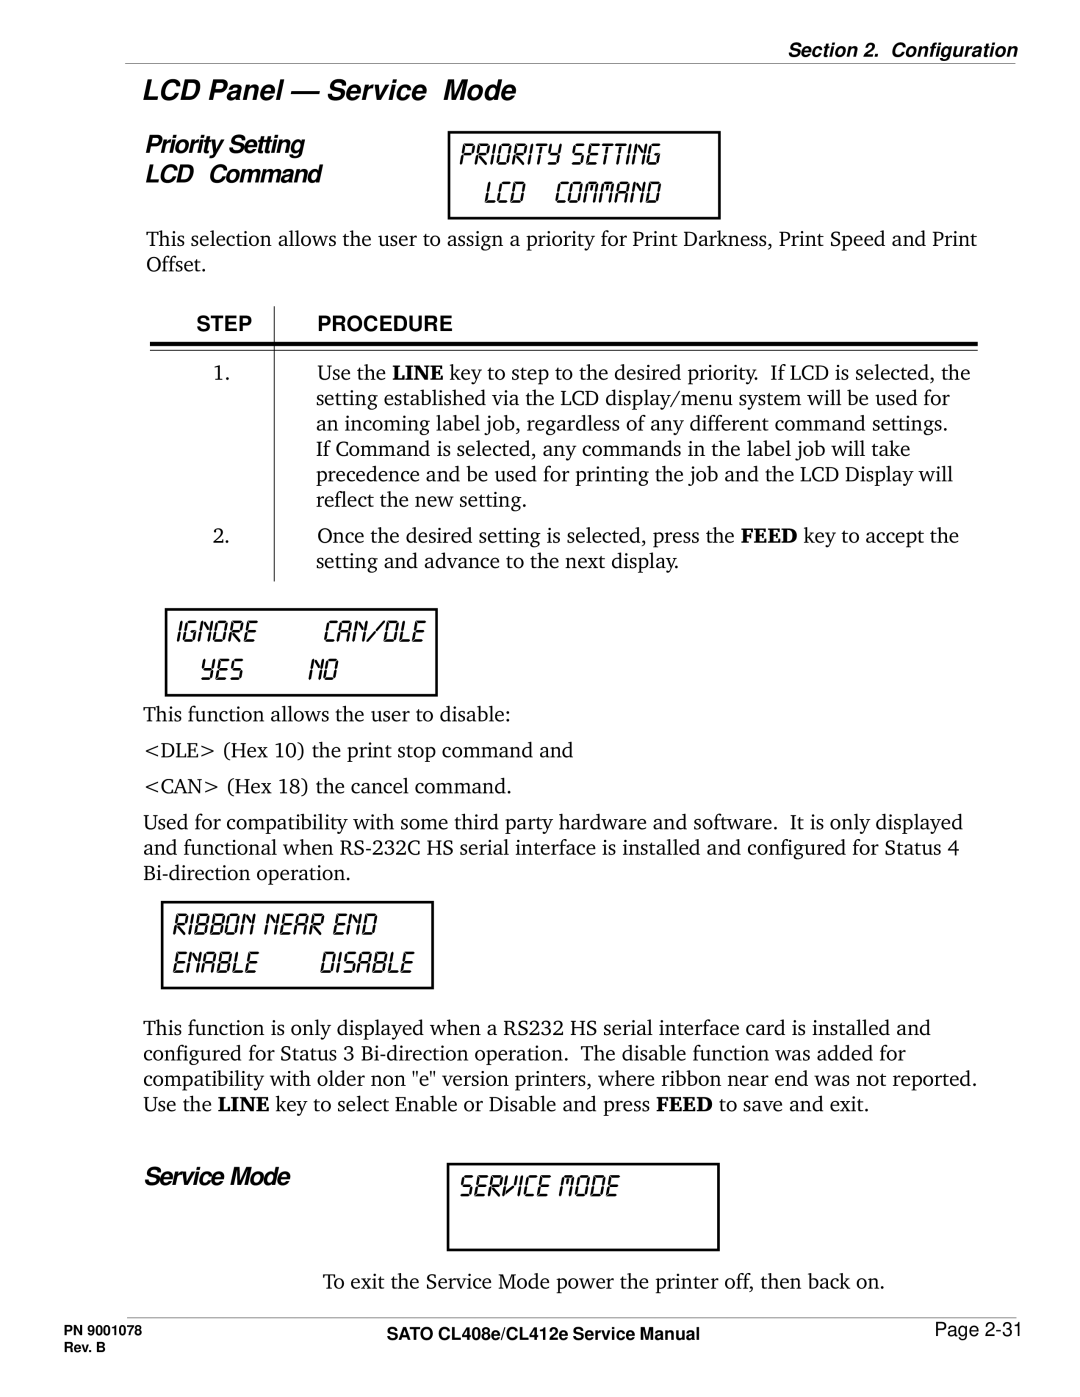 SATO CL412E service manual Ignore can/dle Yes no, Ribbon near end Enable disable, Service Mode 